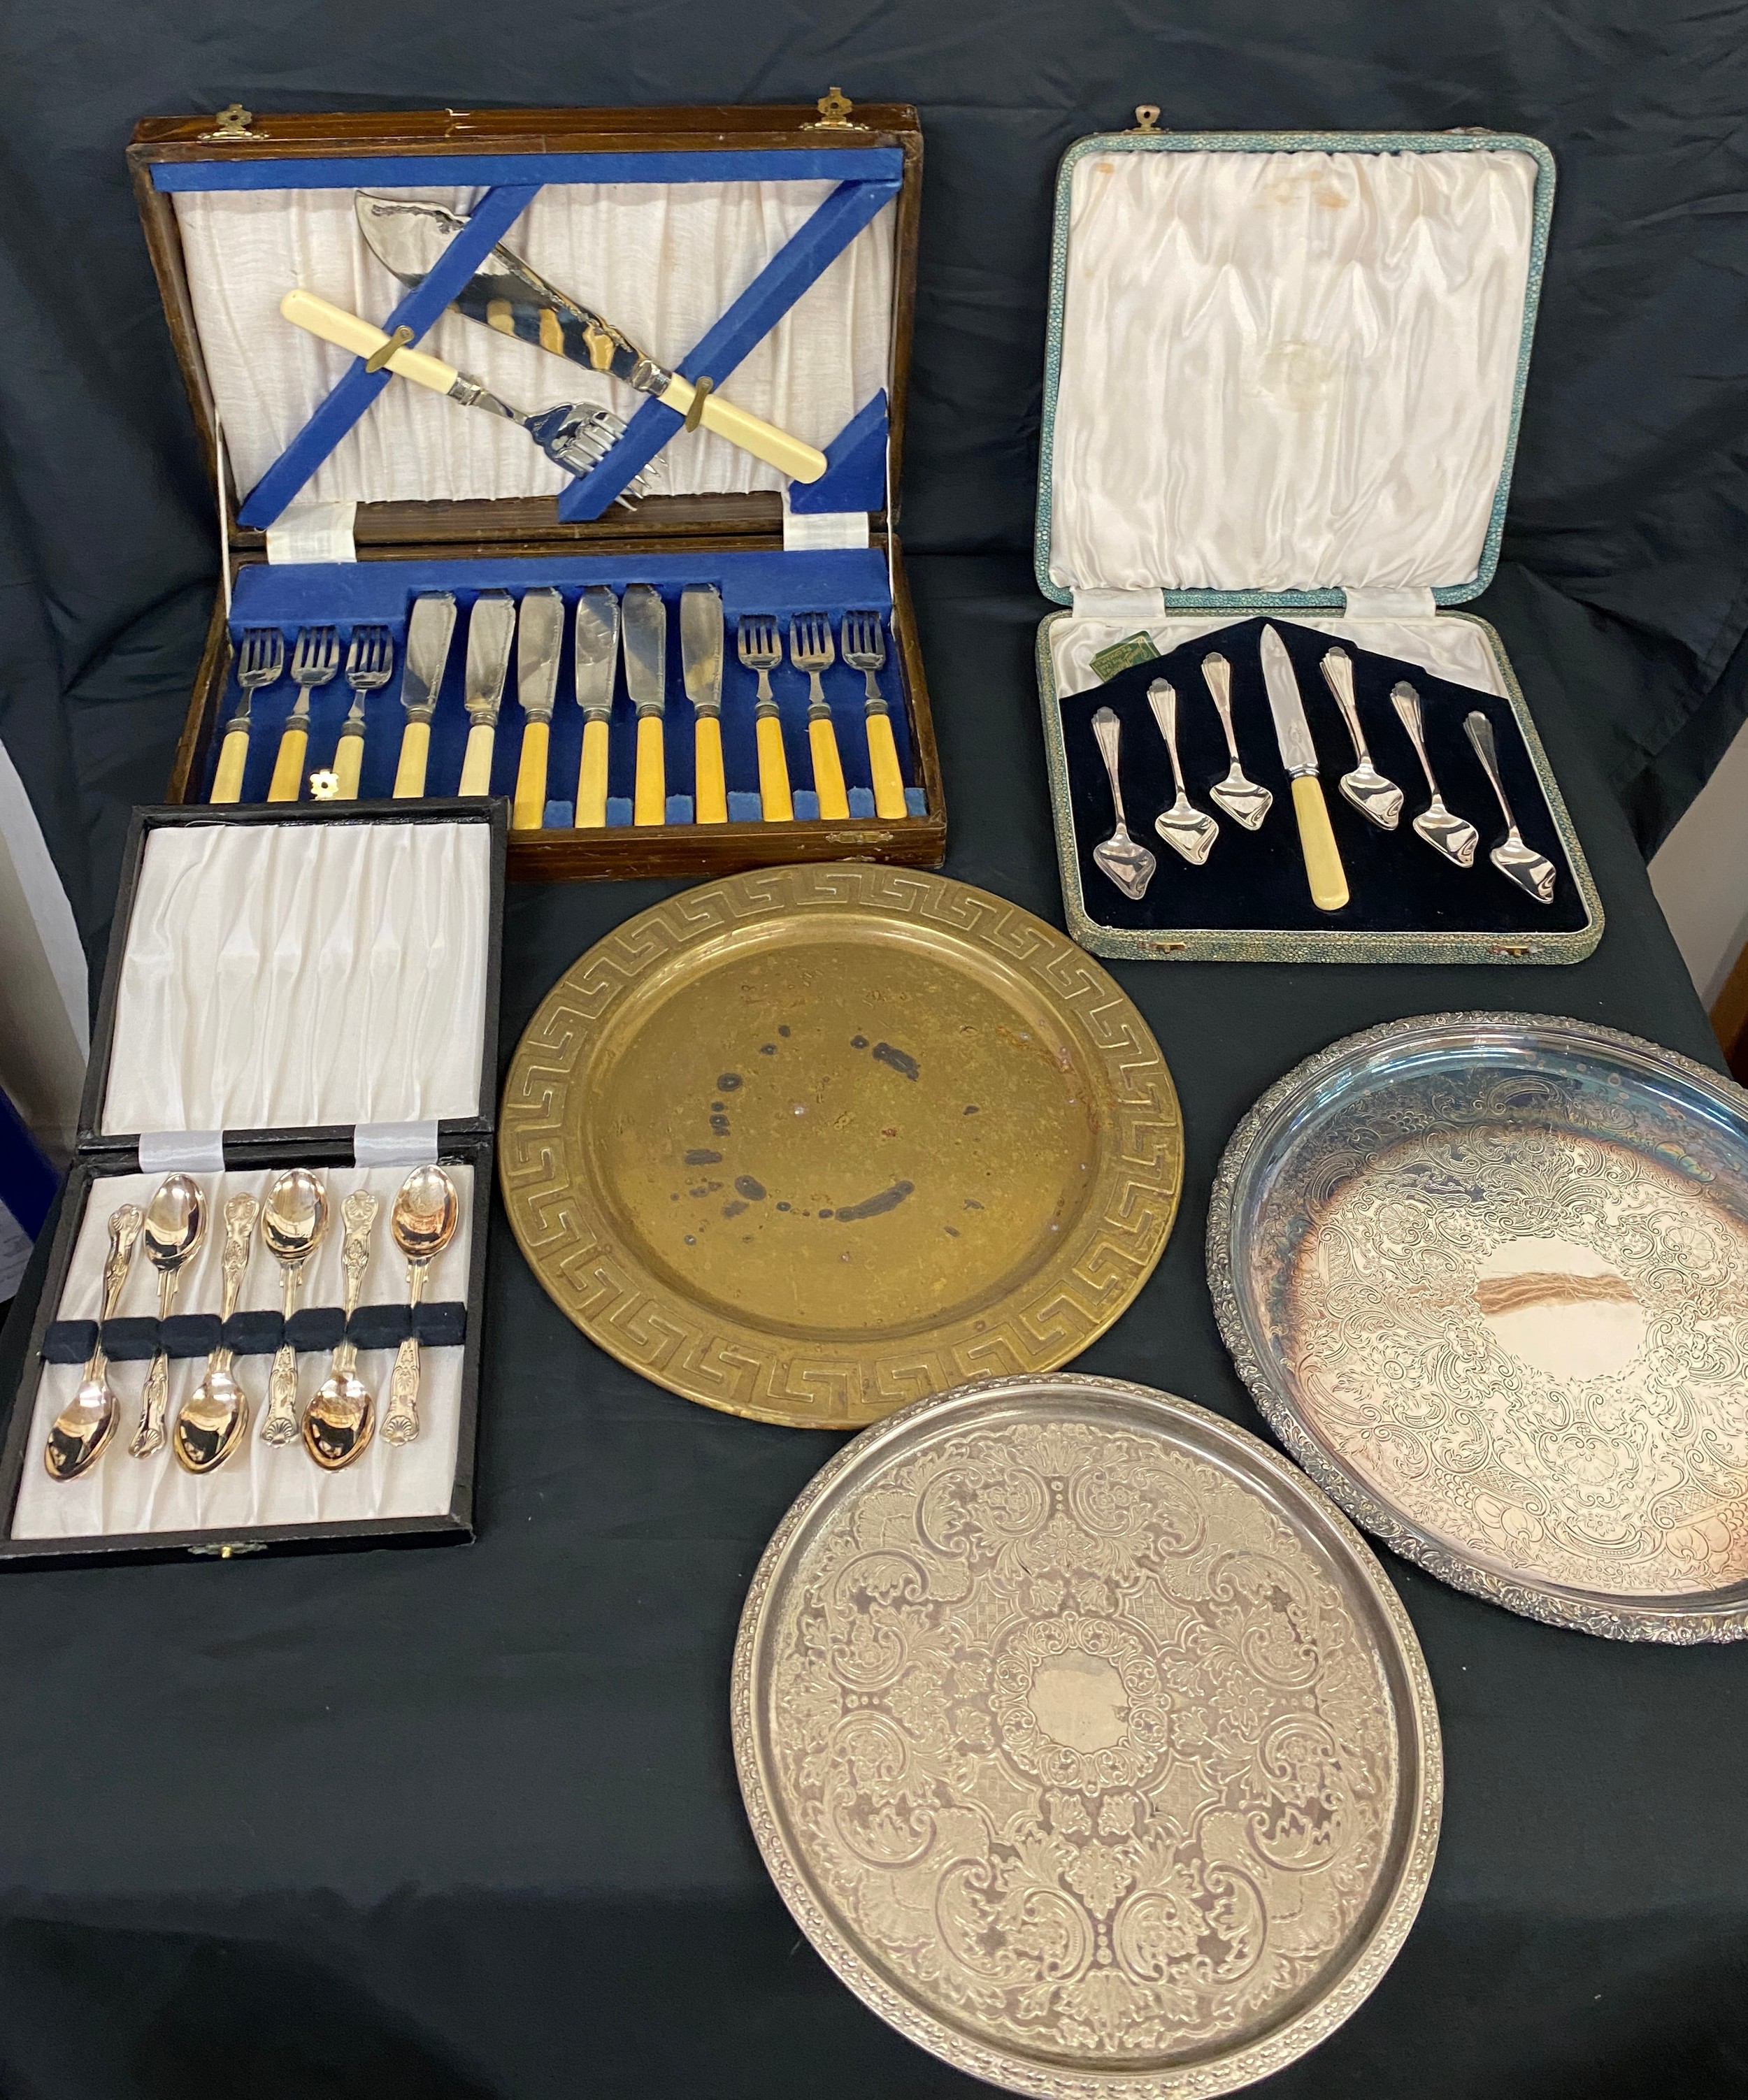 3 cased silver plated cutlery sets, 2 silver plated small small circular trays, 1 brass tray - Image 2 of 5